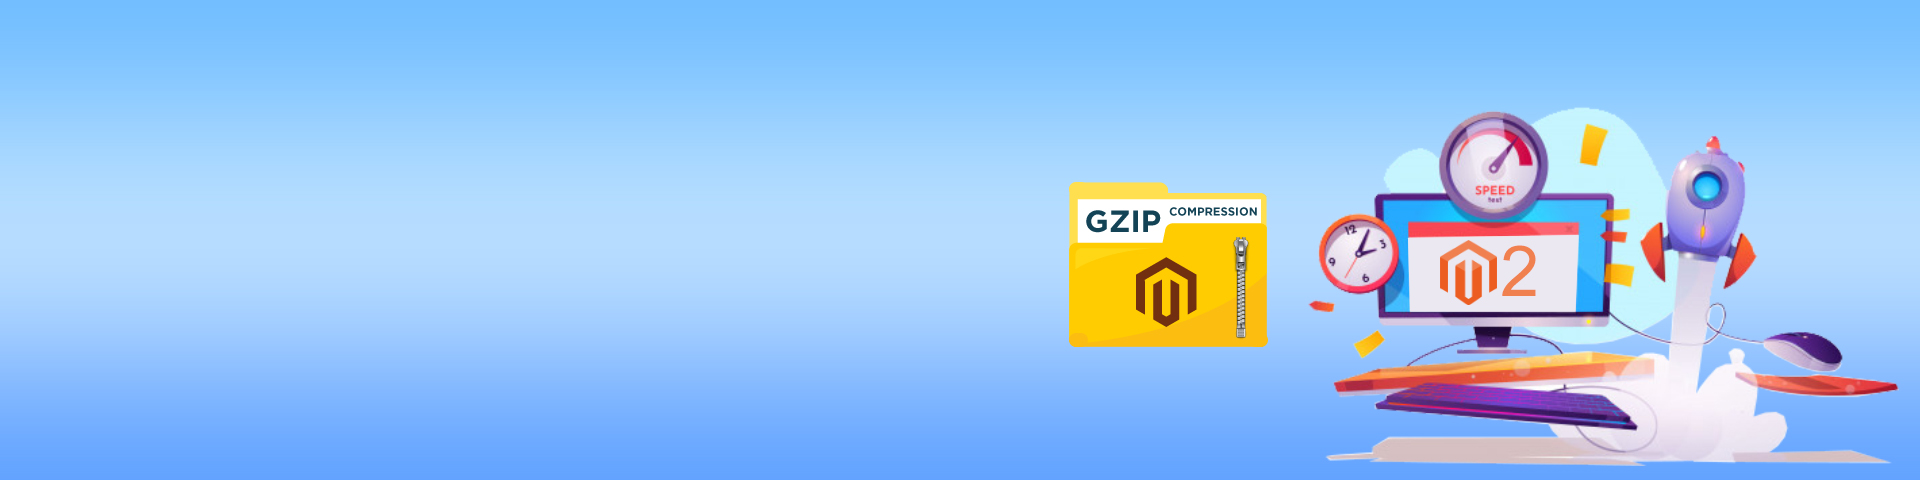 Impact-of-gzip-compression-in-Magento-2-Speed-Optimization1